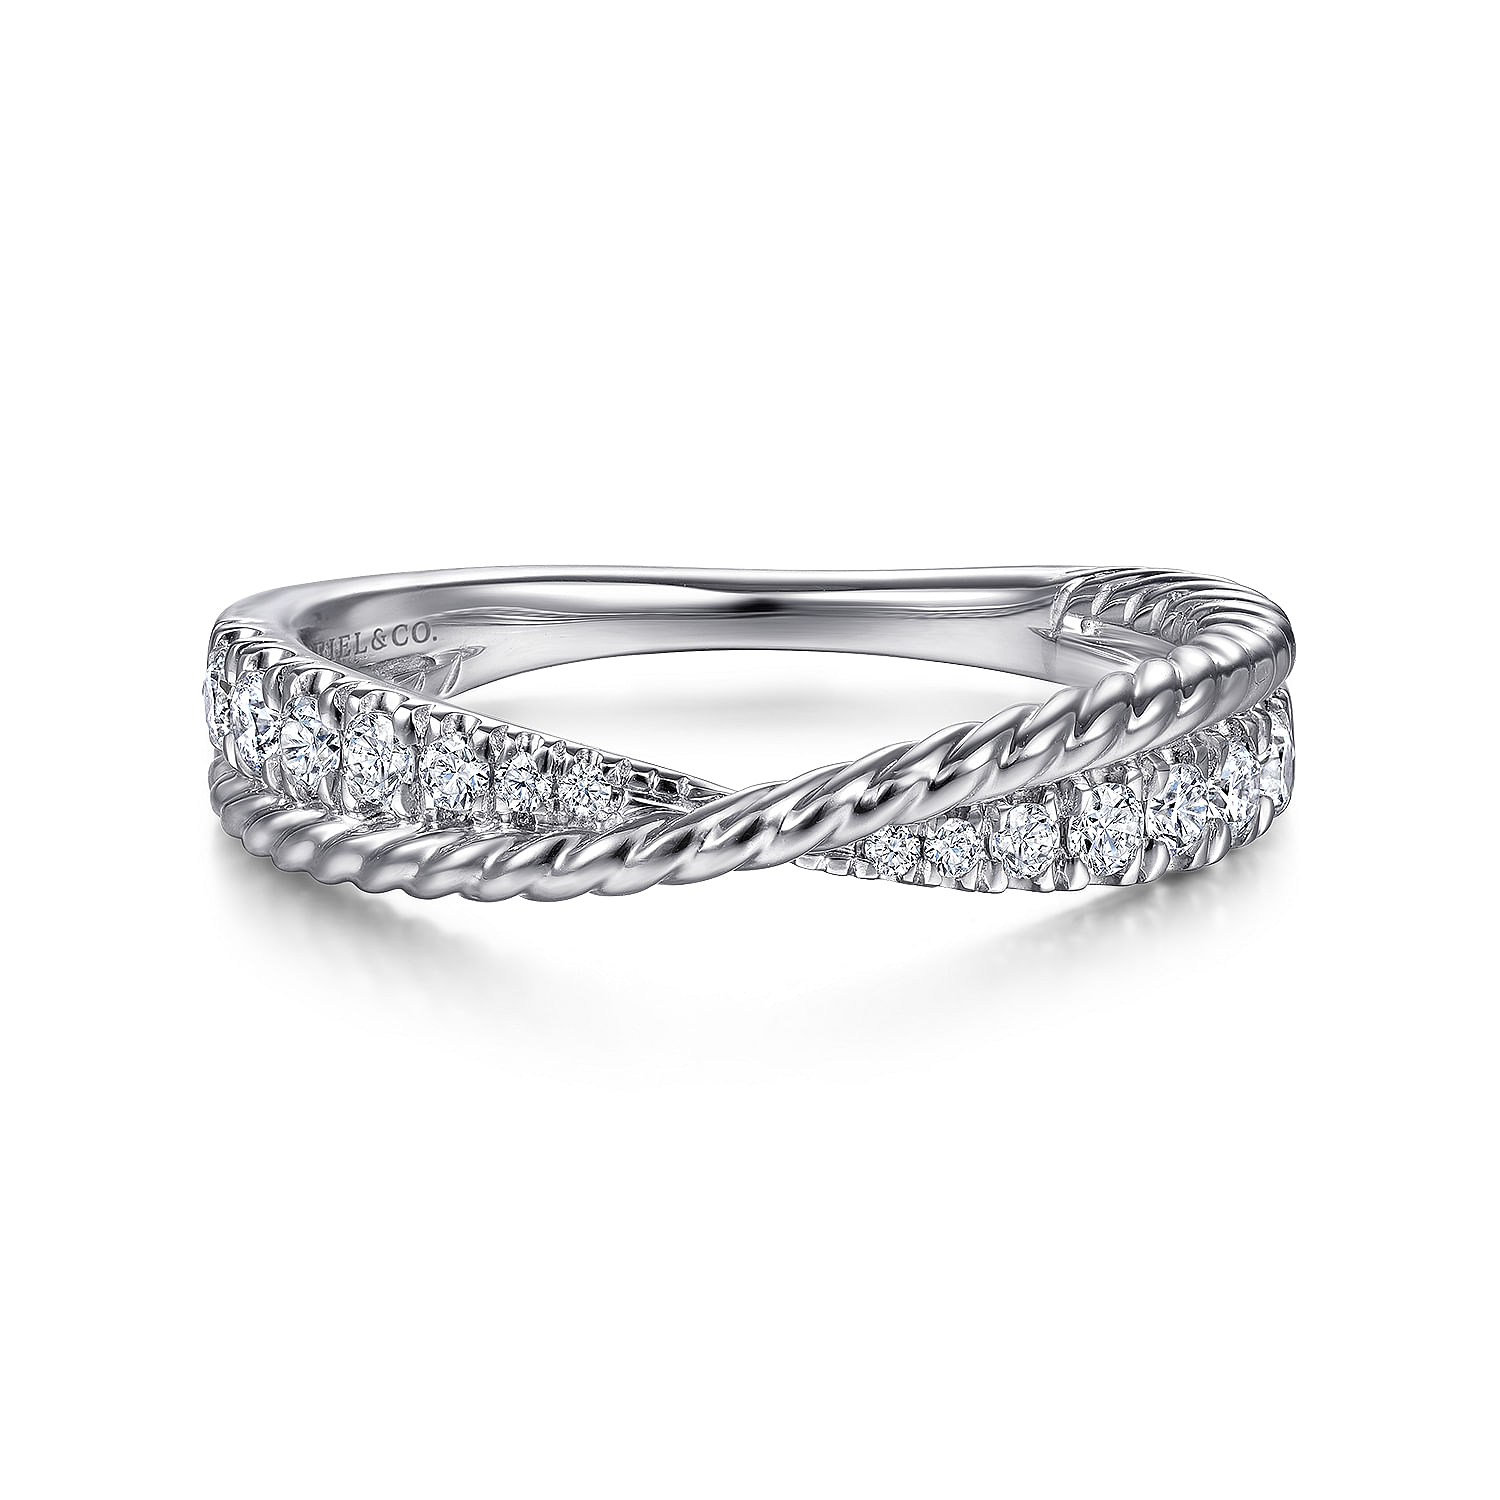 14K White Gold Criss Cross Diamond Anniversary Band with Twisted Rope Detail